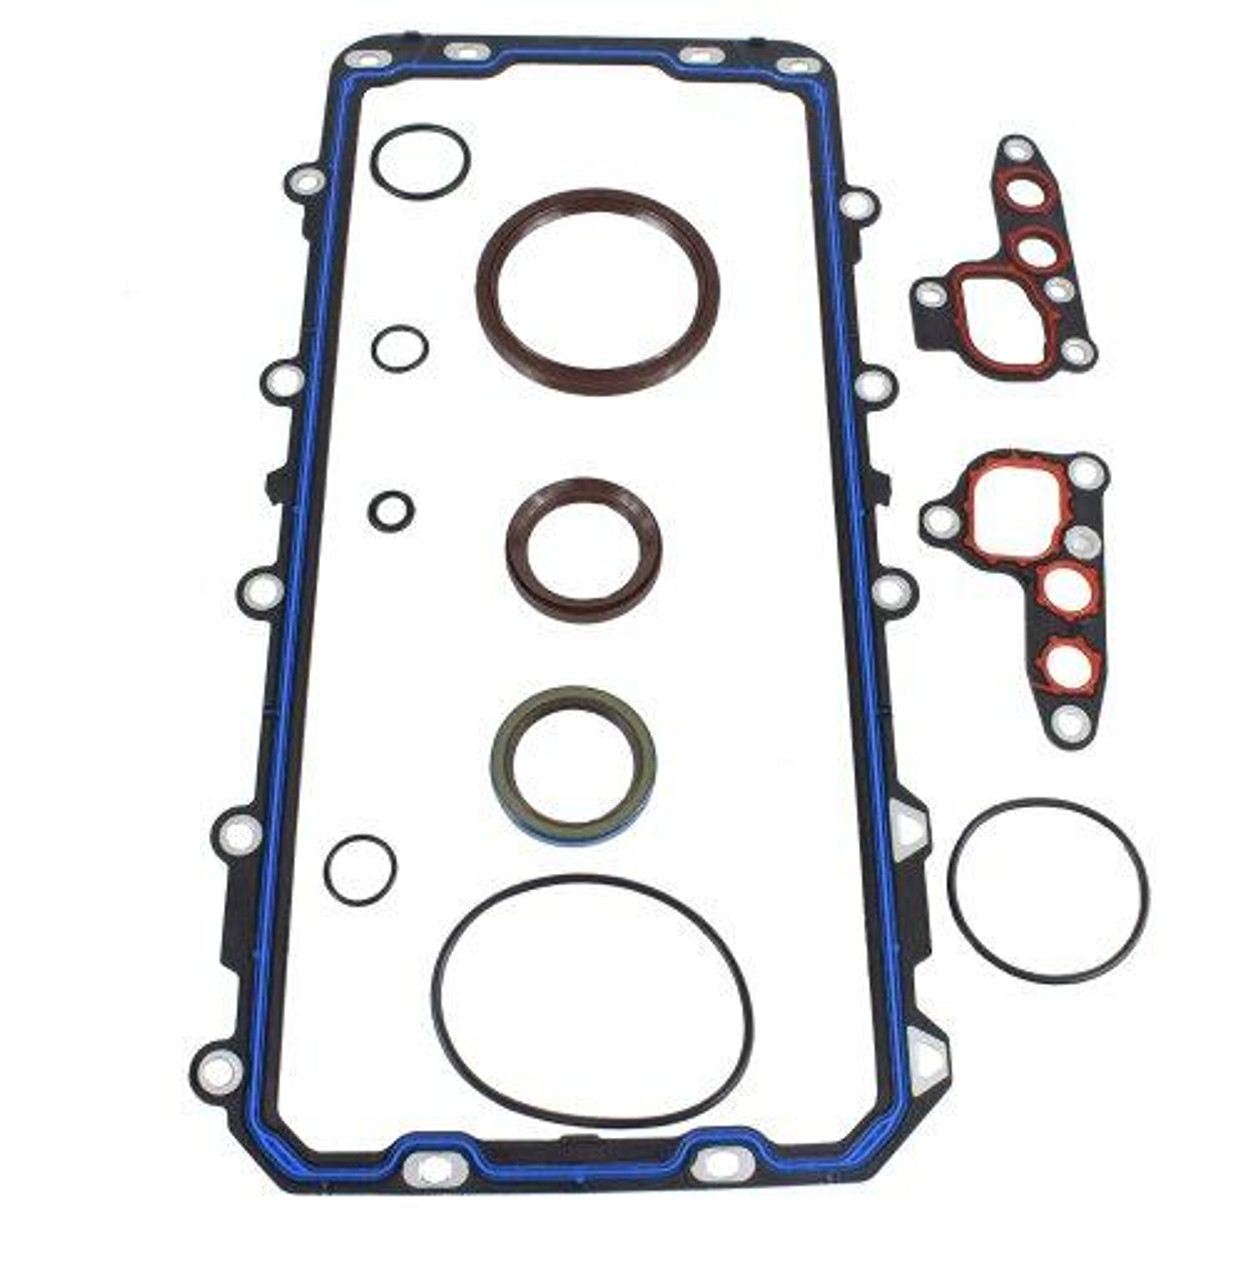 Lower Gasket Set - 2009 Ford Mustang 5.4L Engine Parts # LGS4150ZE278